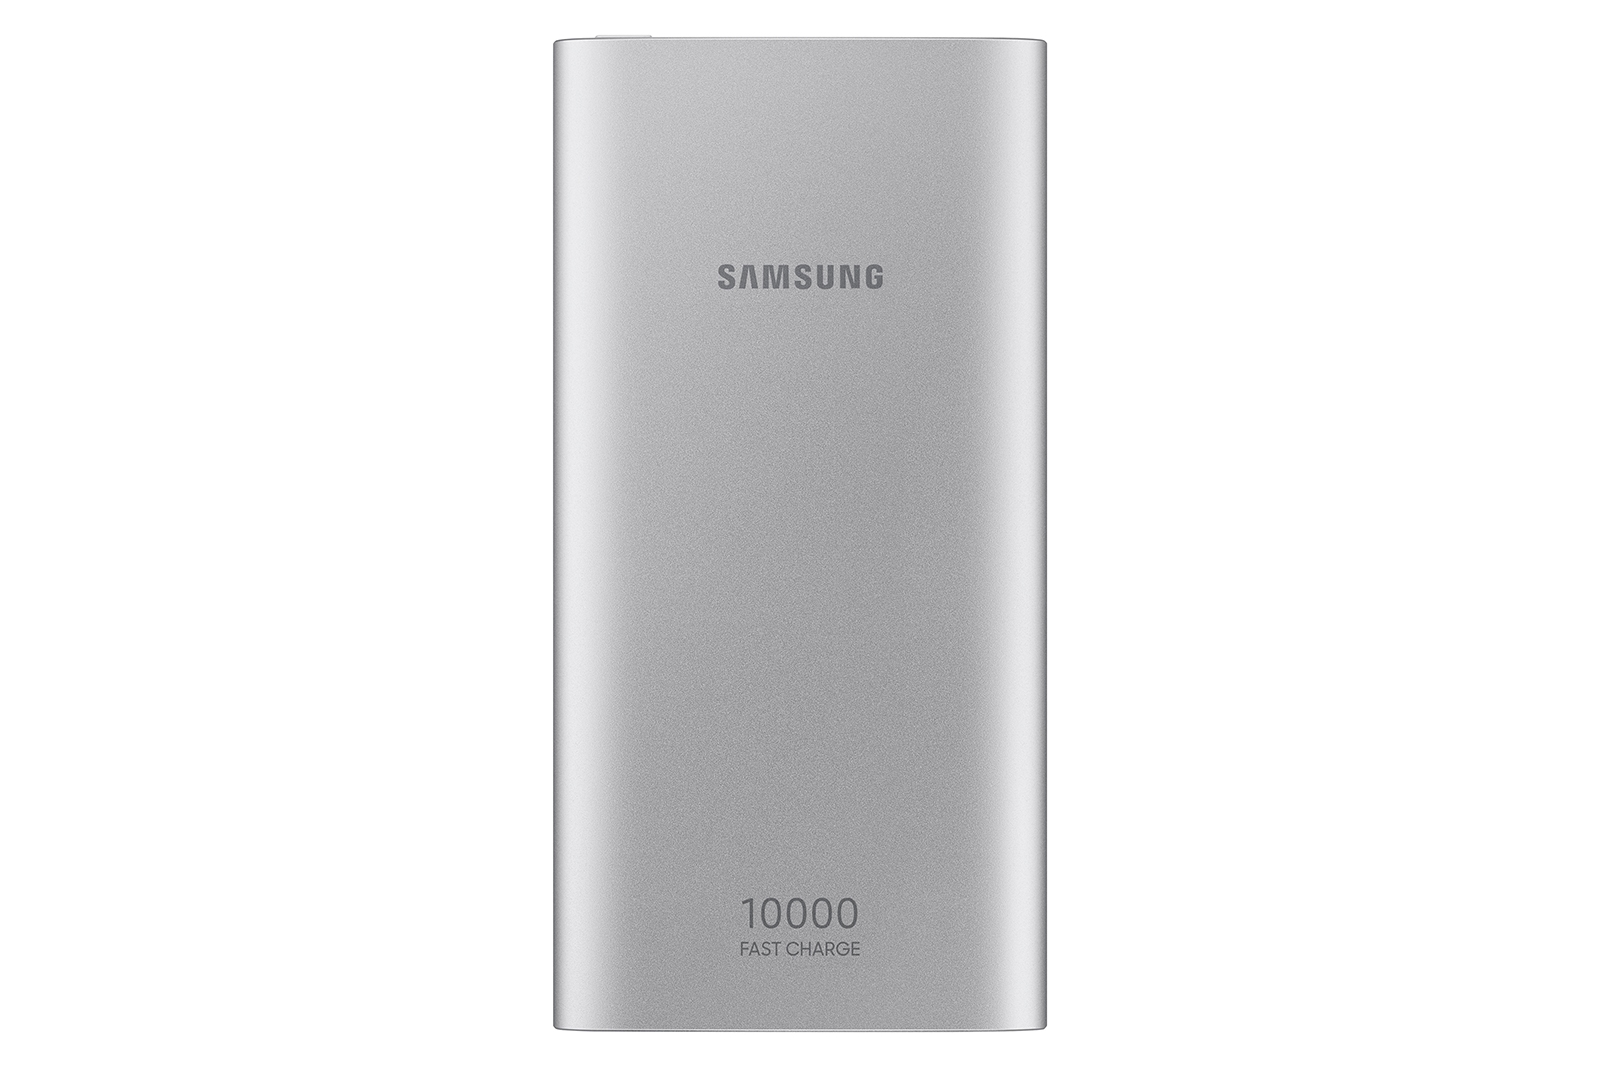 10,000 mAh mini power bank for Samsung and iPhones